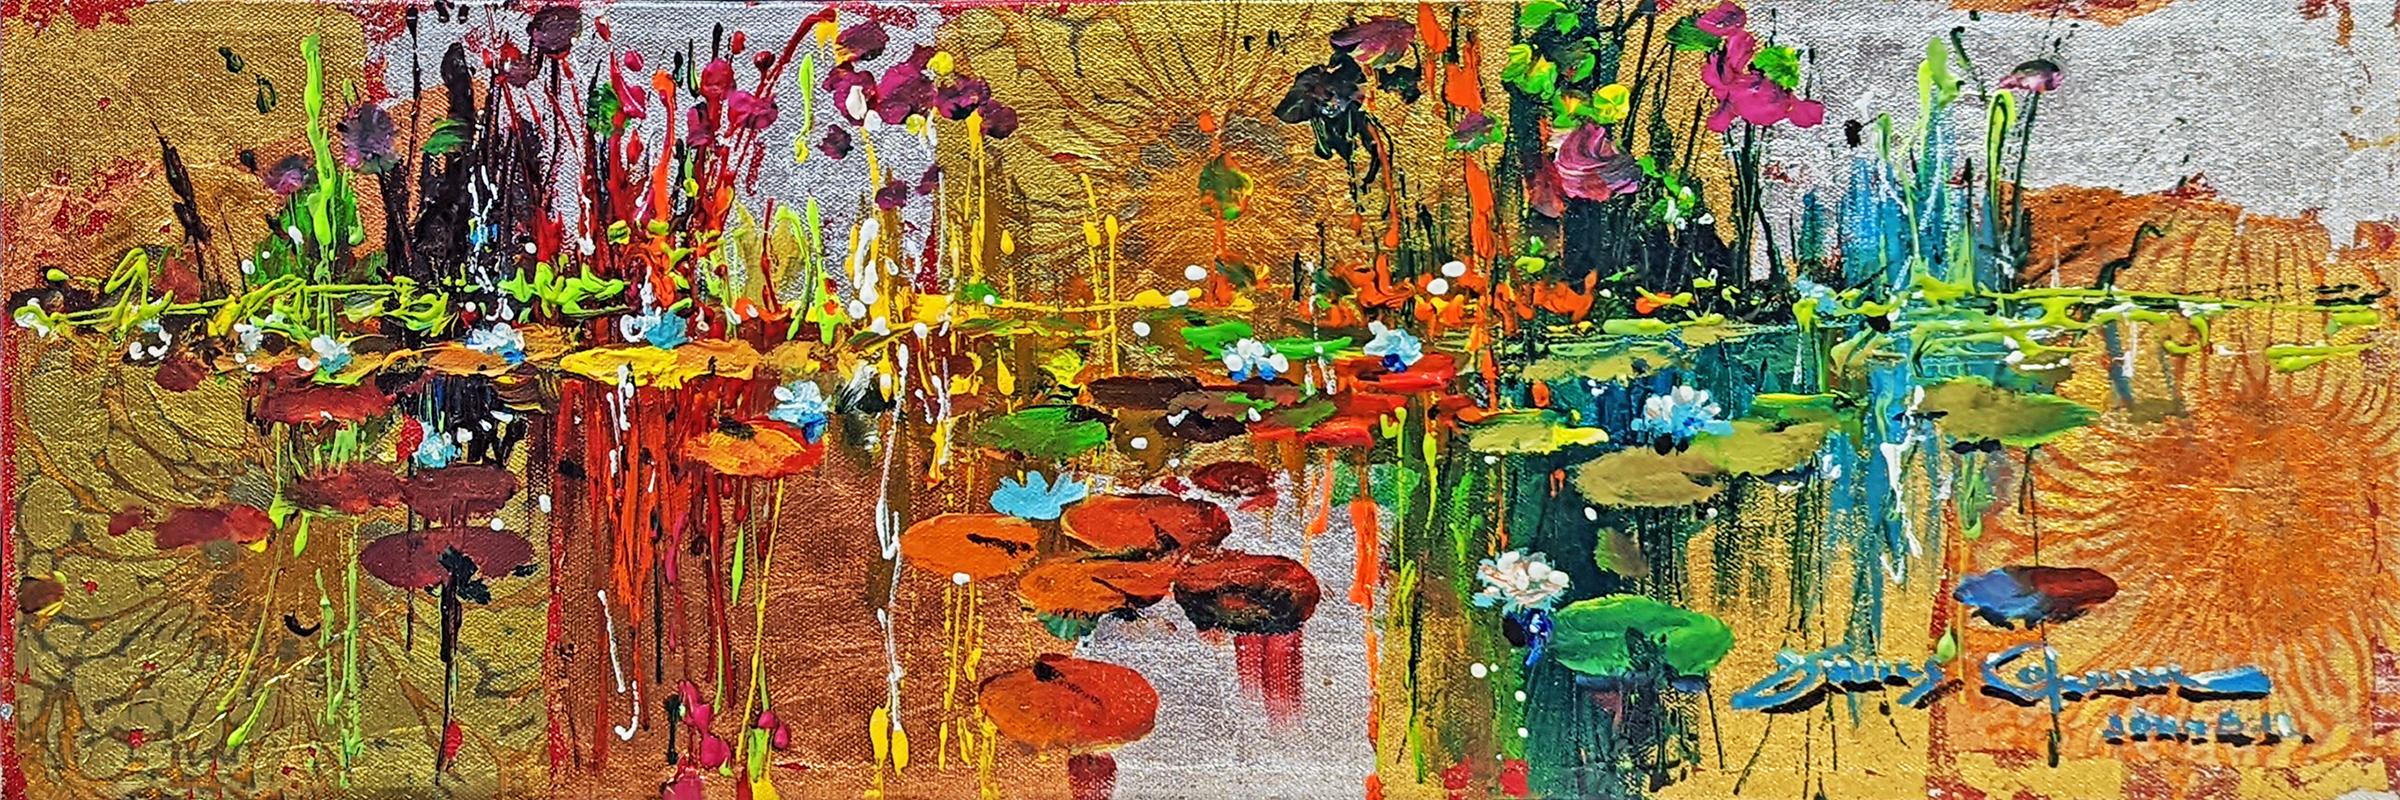 GIVERNY IN GOLD - Mixed Media Art by James Coleman